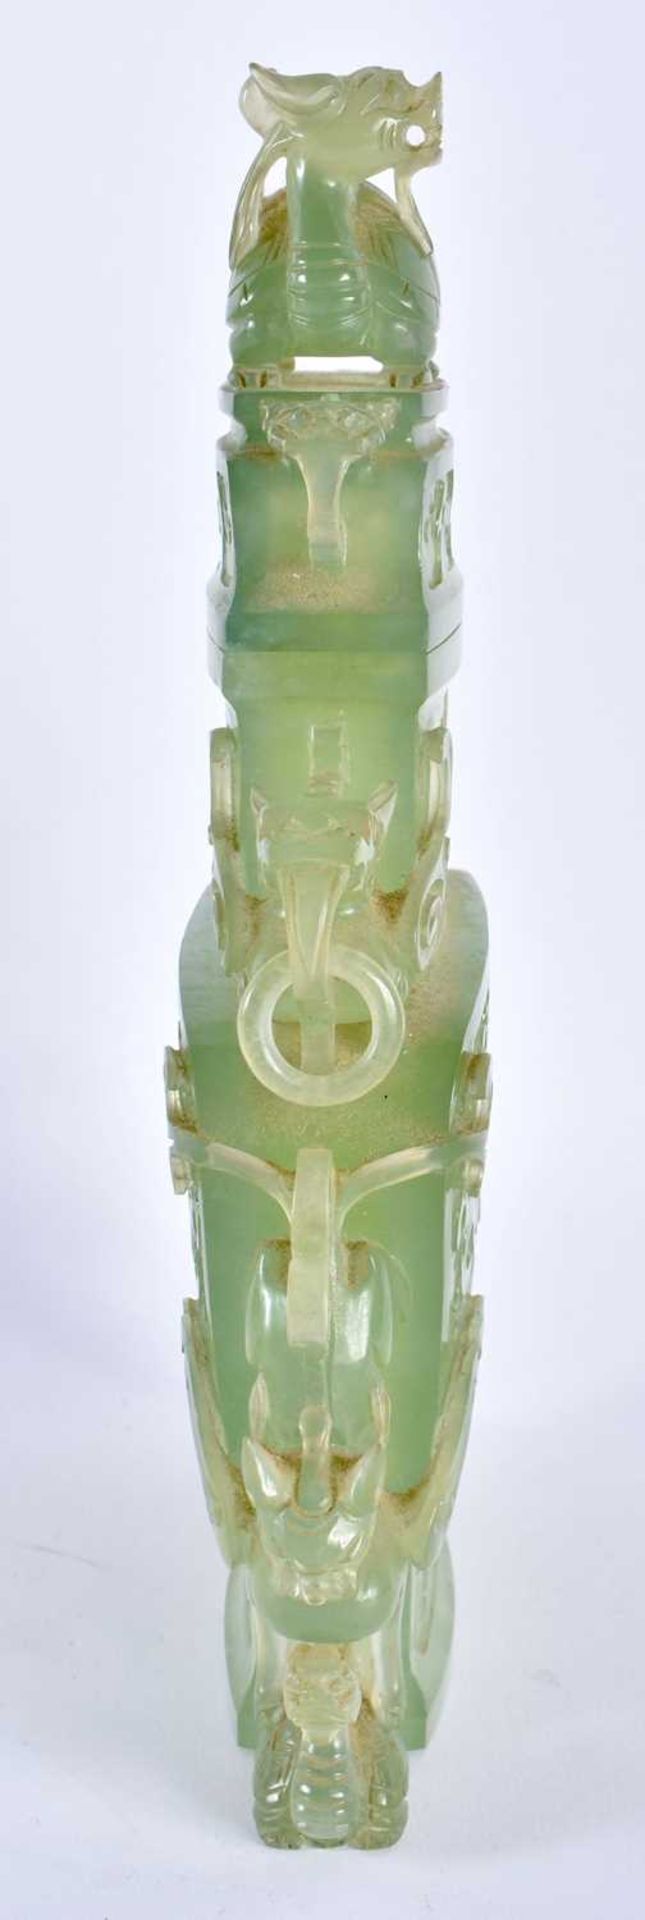 A LARGE 19TH CENTURY CHINESE CARVED TWIN HANDLED JADE VASE AND COVER Qing. 24 cm x 14 cm. - Image 4 of 7